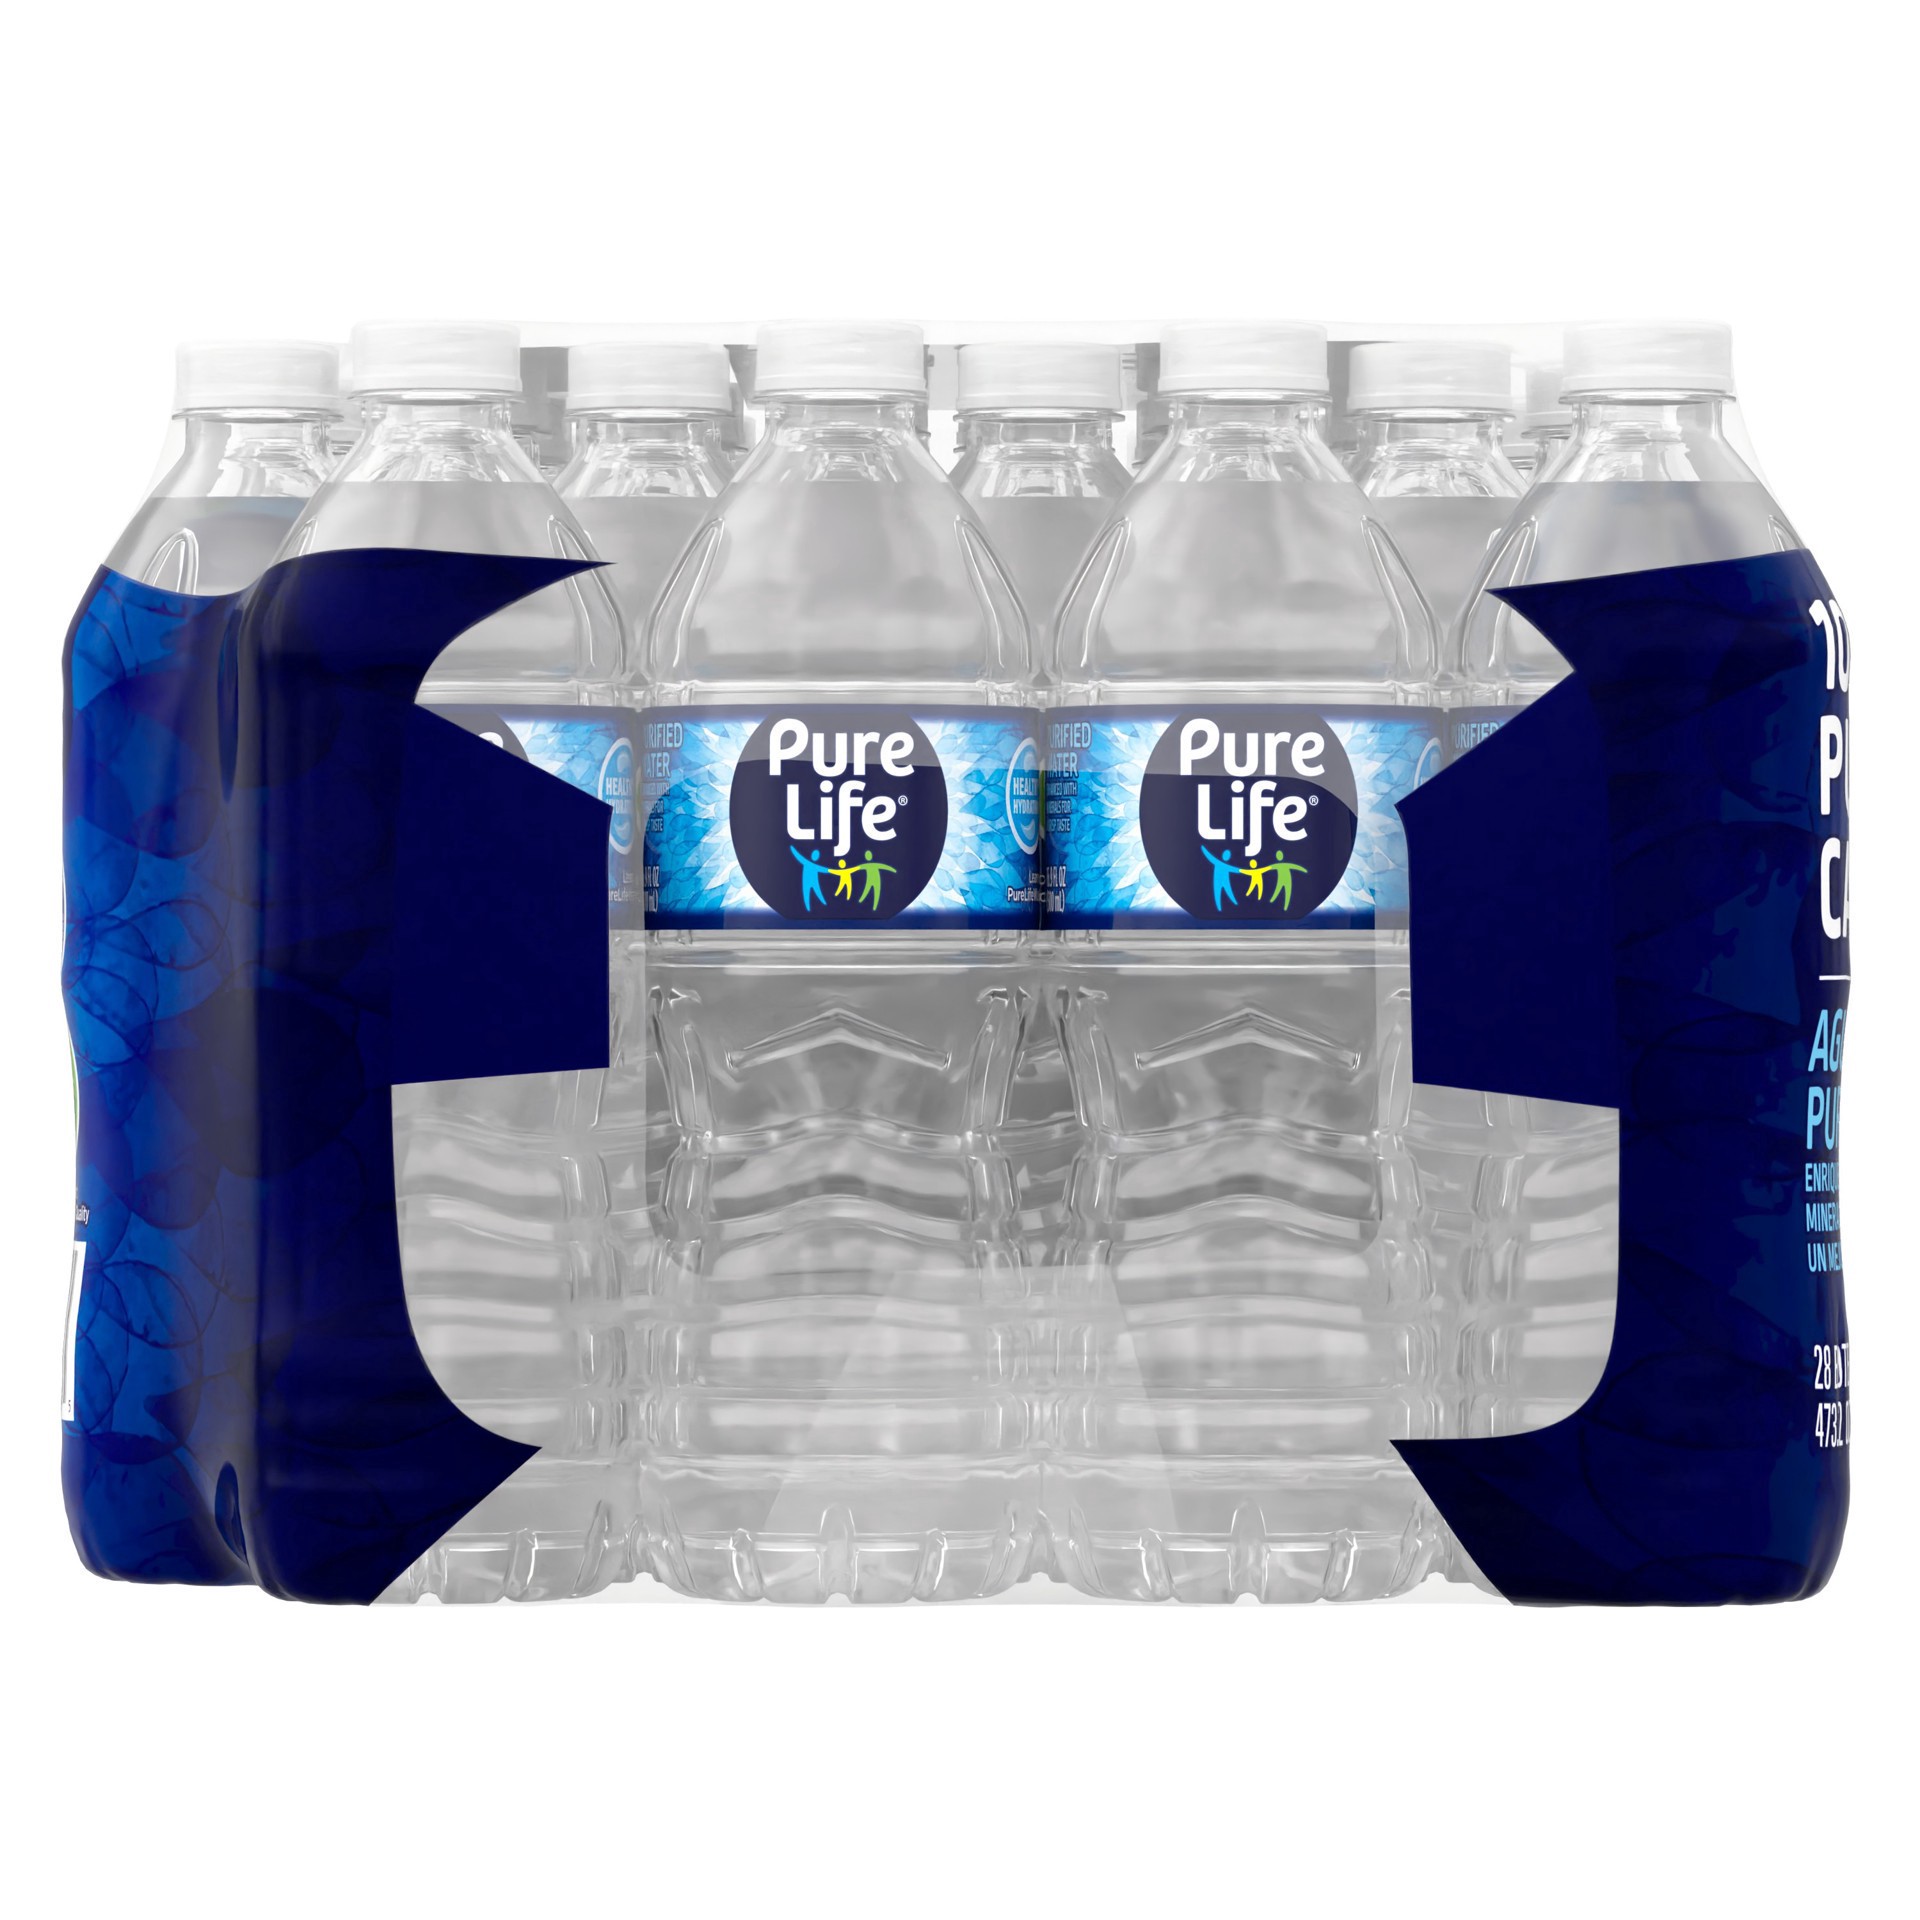 Pure Life® Purified Water, 3 Liter 6-Pack